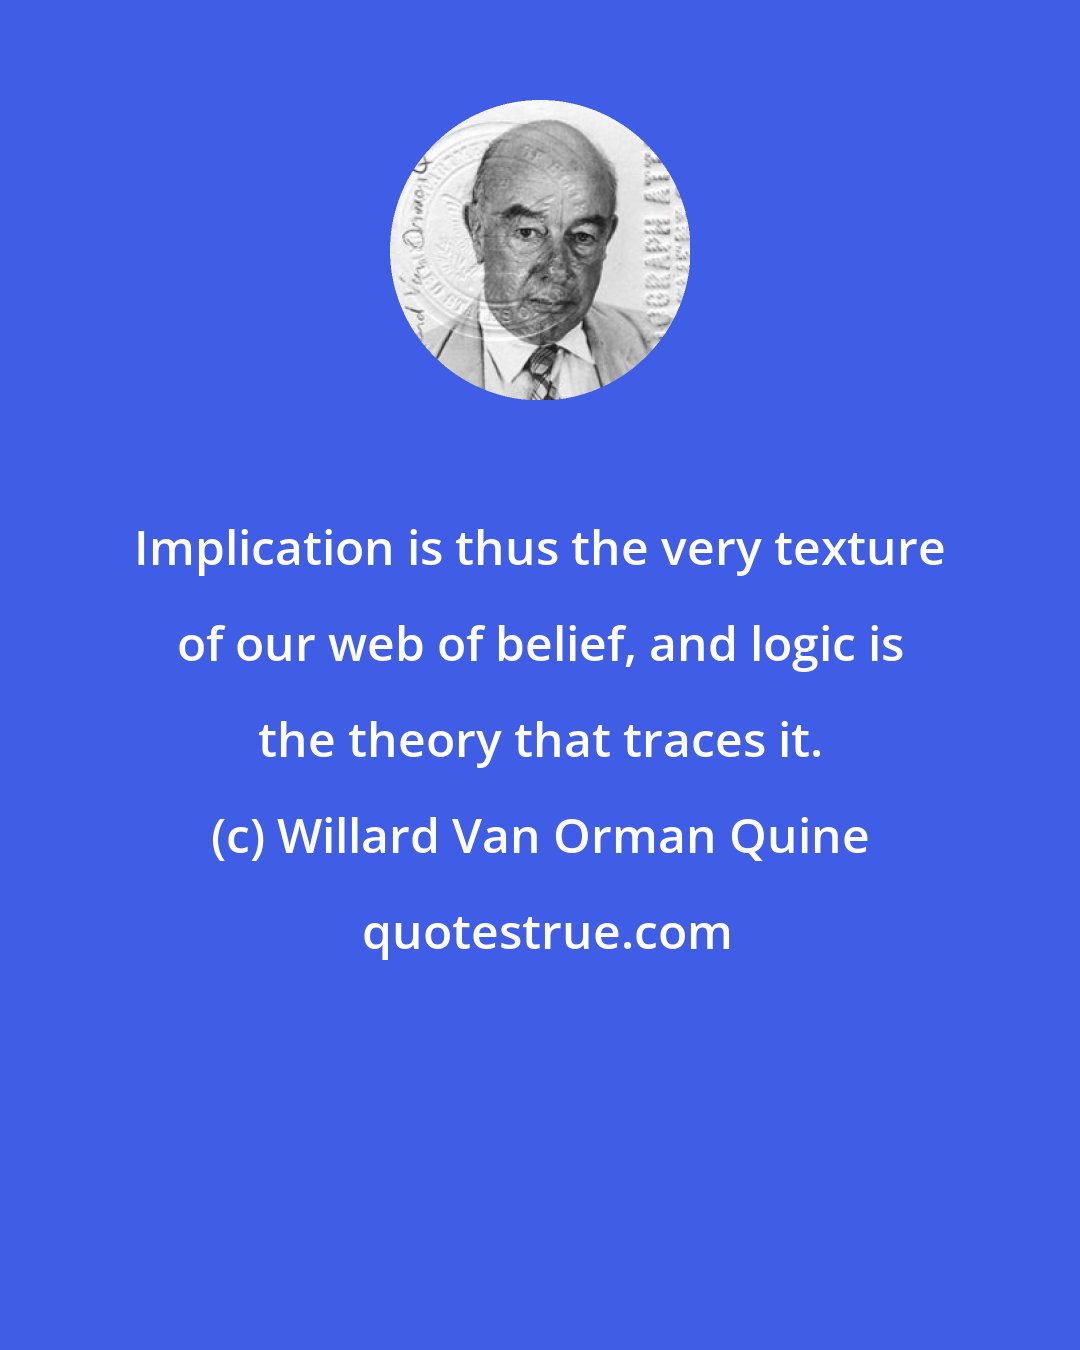 Willard Van Orman Quine: Implication is thus the very texture of our web of belief, and logic is the theory that traces it.